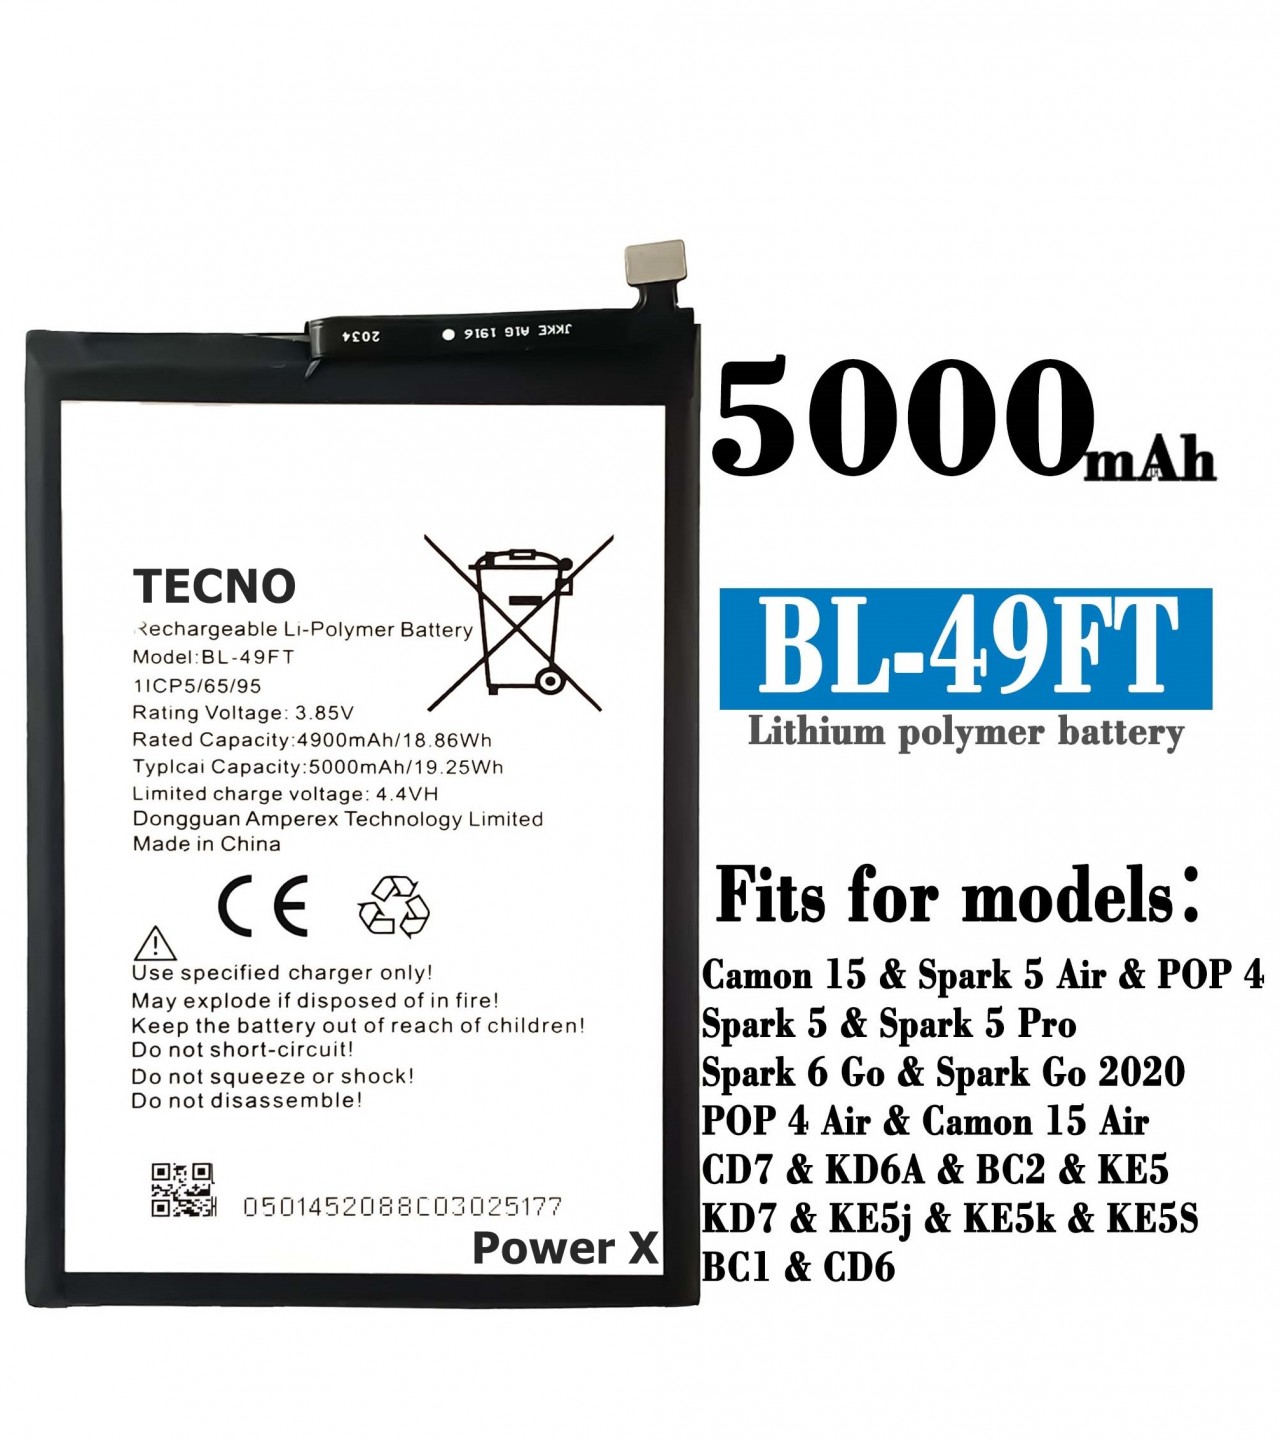 TECNO Spark 5 Pro  BL-49FT Battery with 5000mAh Capacity_Silver